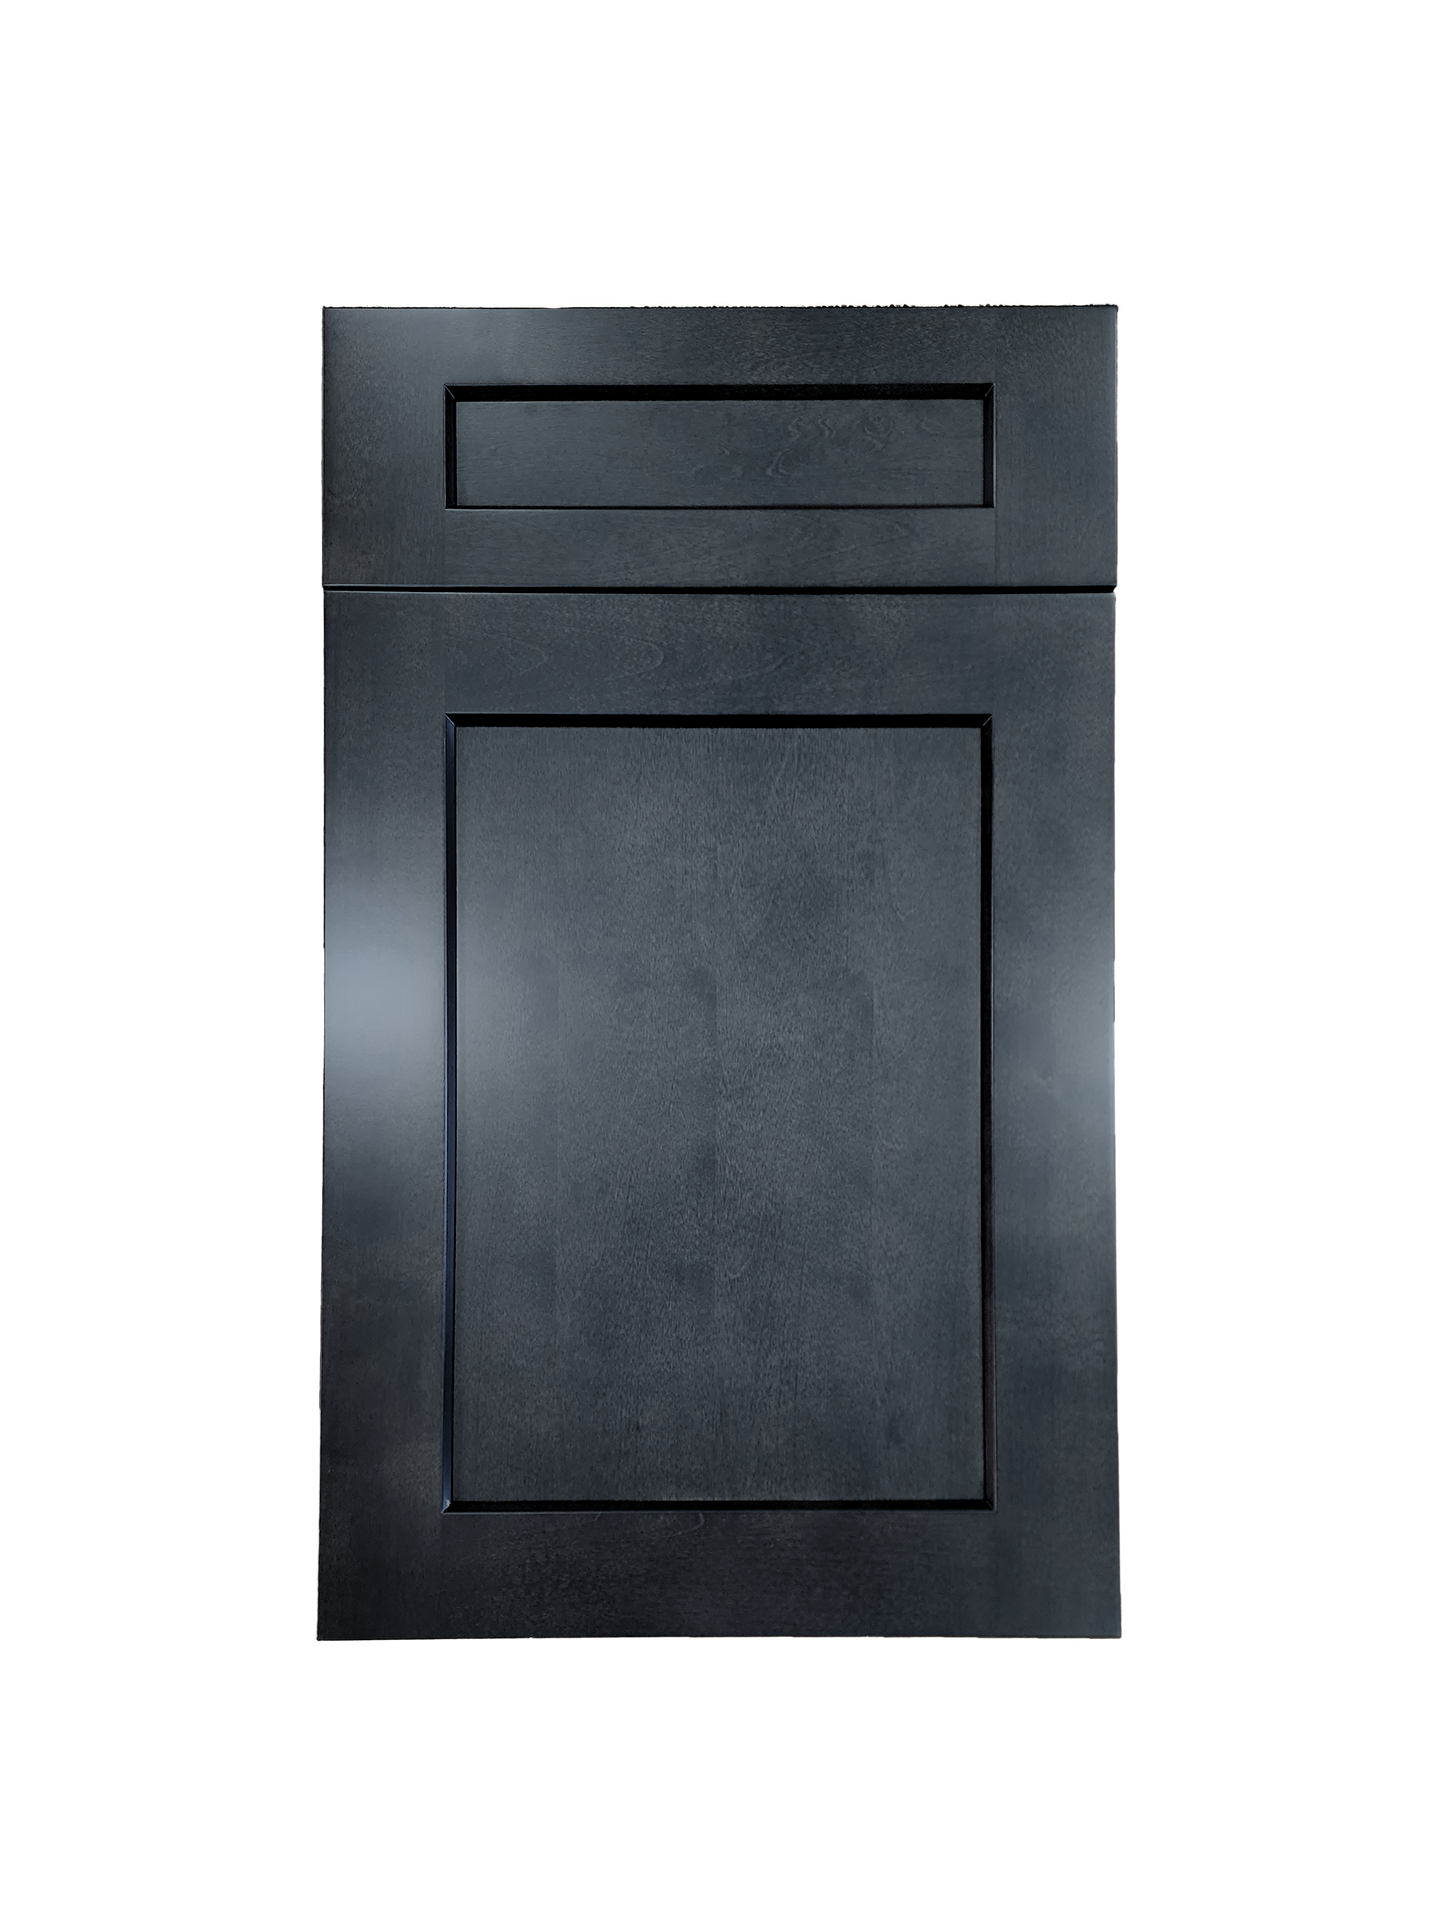 Stormy Grey Wall Cabinet 30 inches wide 12 inches deep 12 inches tall with Stormy Grey box and Stormy Grey doors